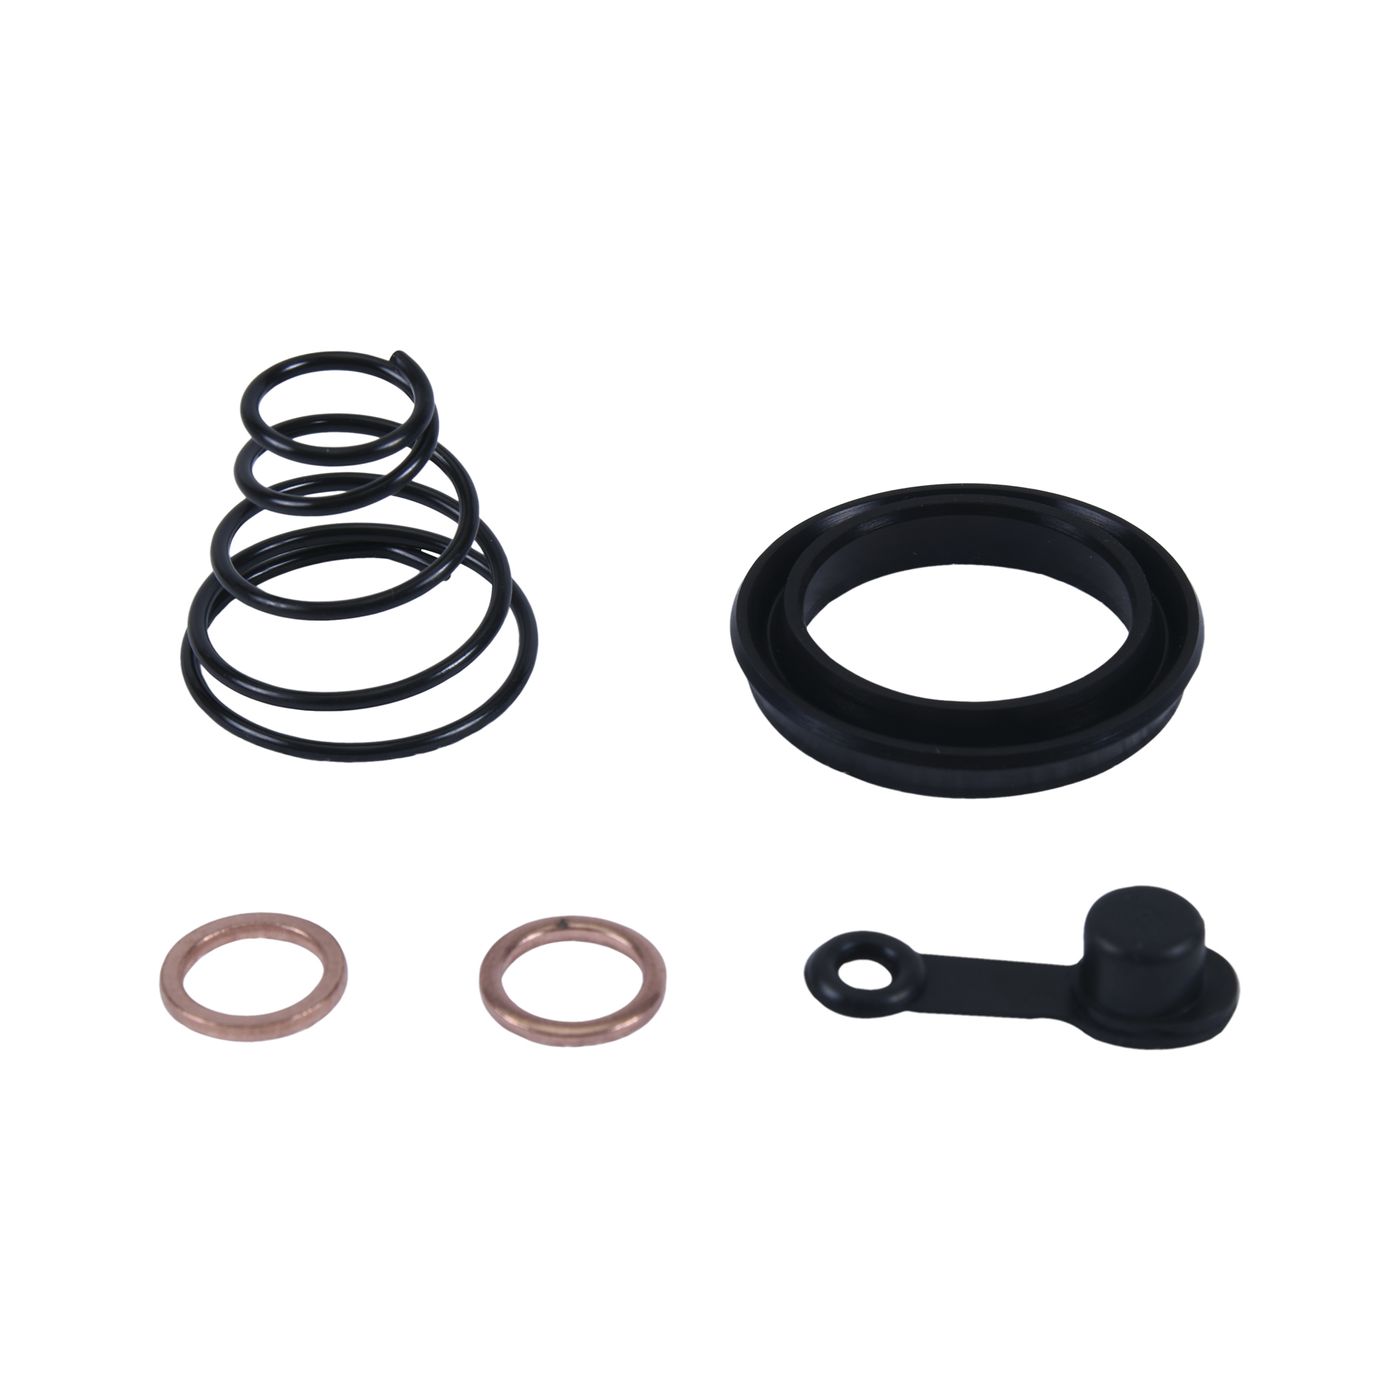 Wrp Clutch Slave Cylinder Kits - WRP186019 image